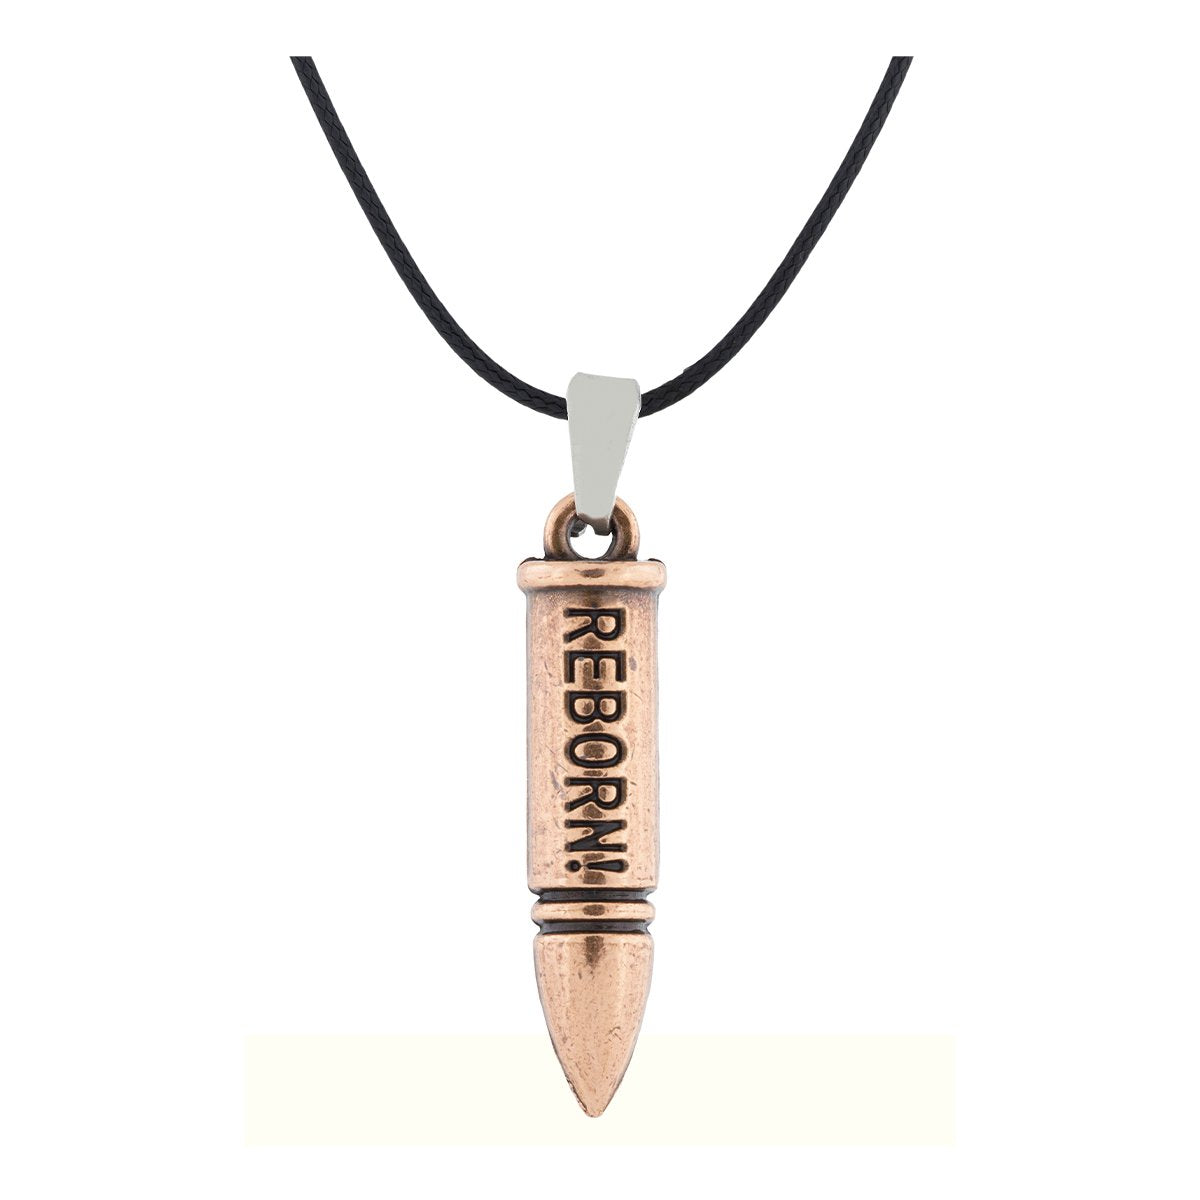 Punk Reborn Copper Finish Stainless Steel Pendant Necklace Chain